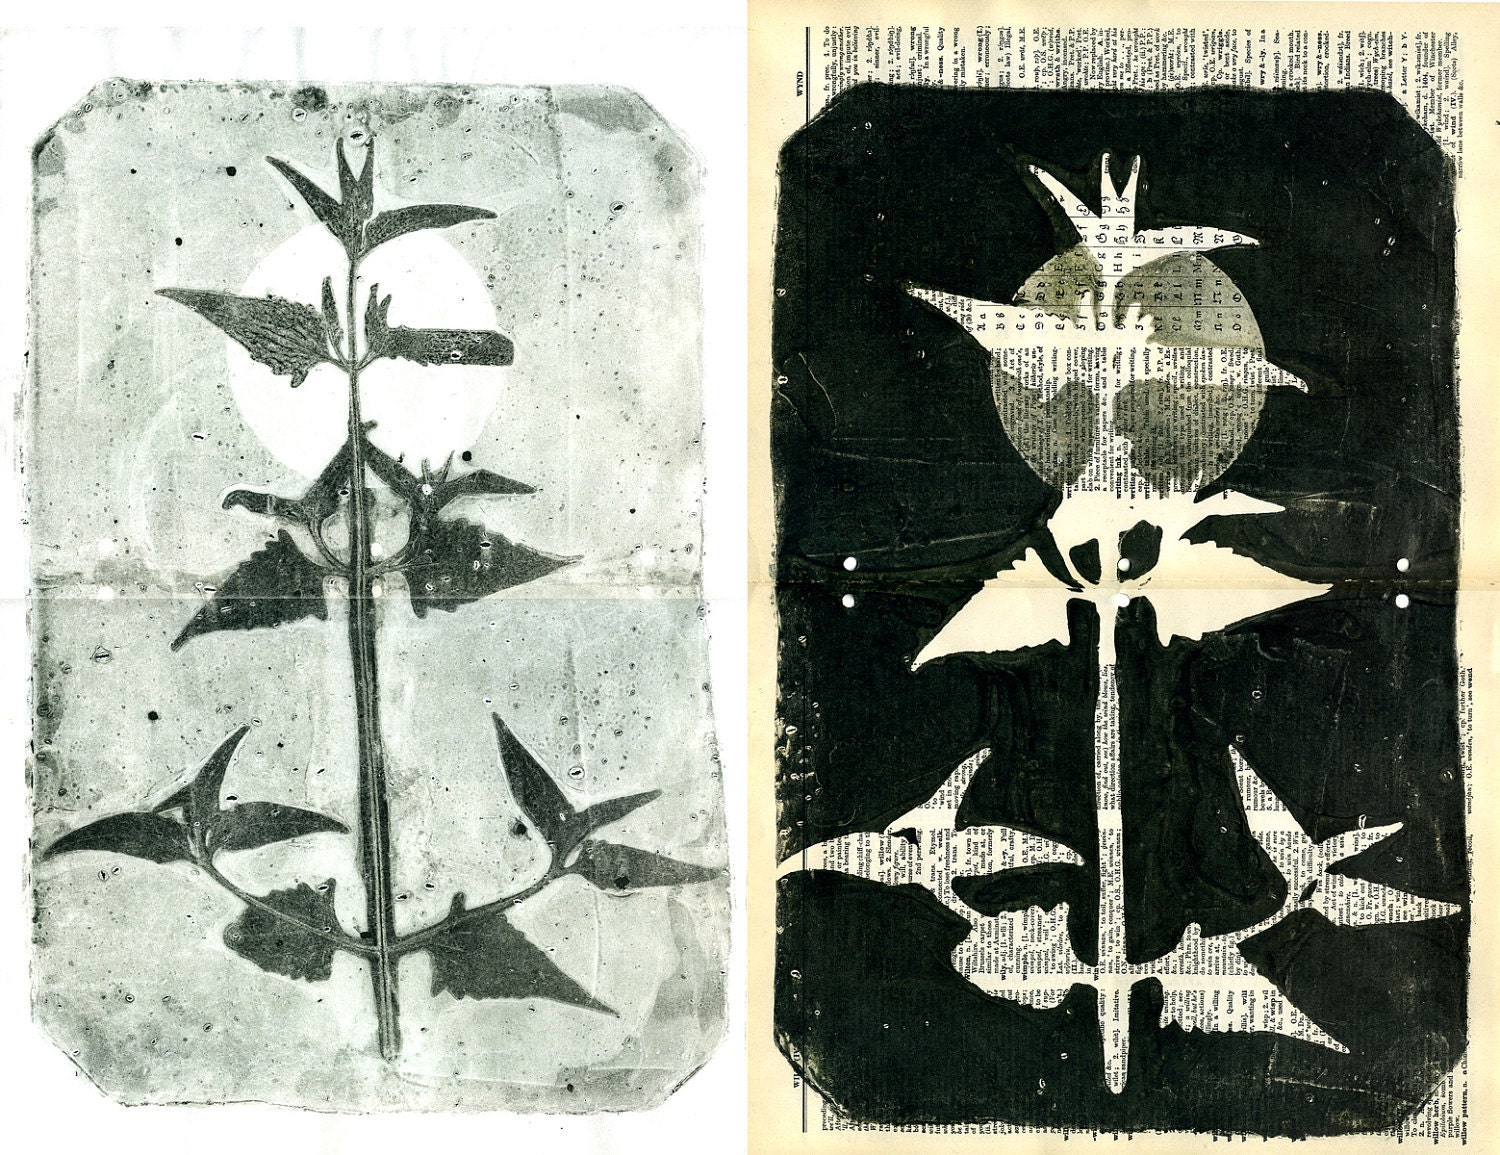 ooak Monotypes: pair of Botanical Silhouettes on Vintage Dictionary Sheets and Rice paper - 88editions